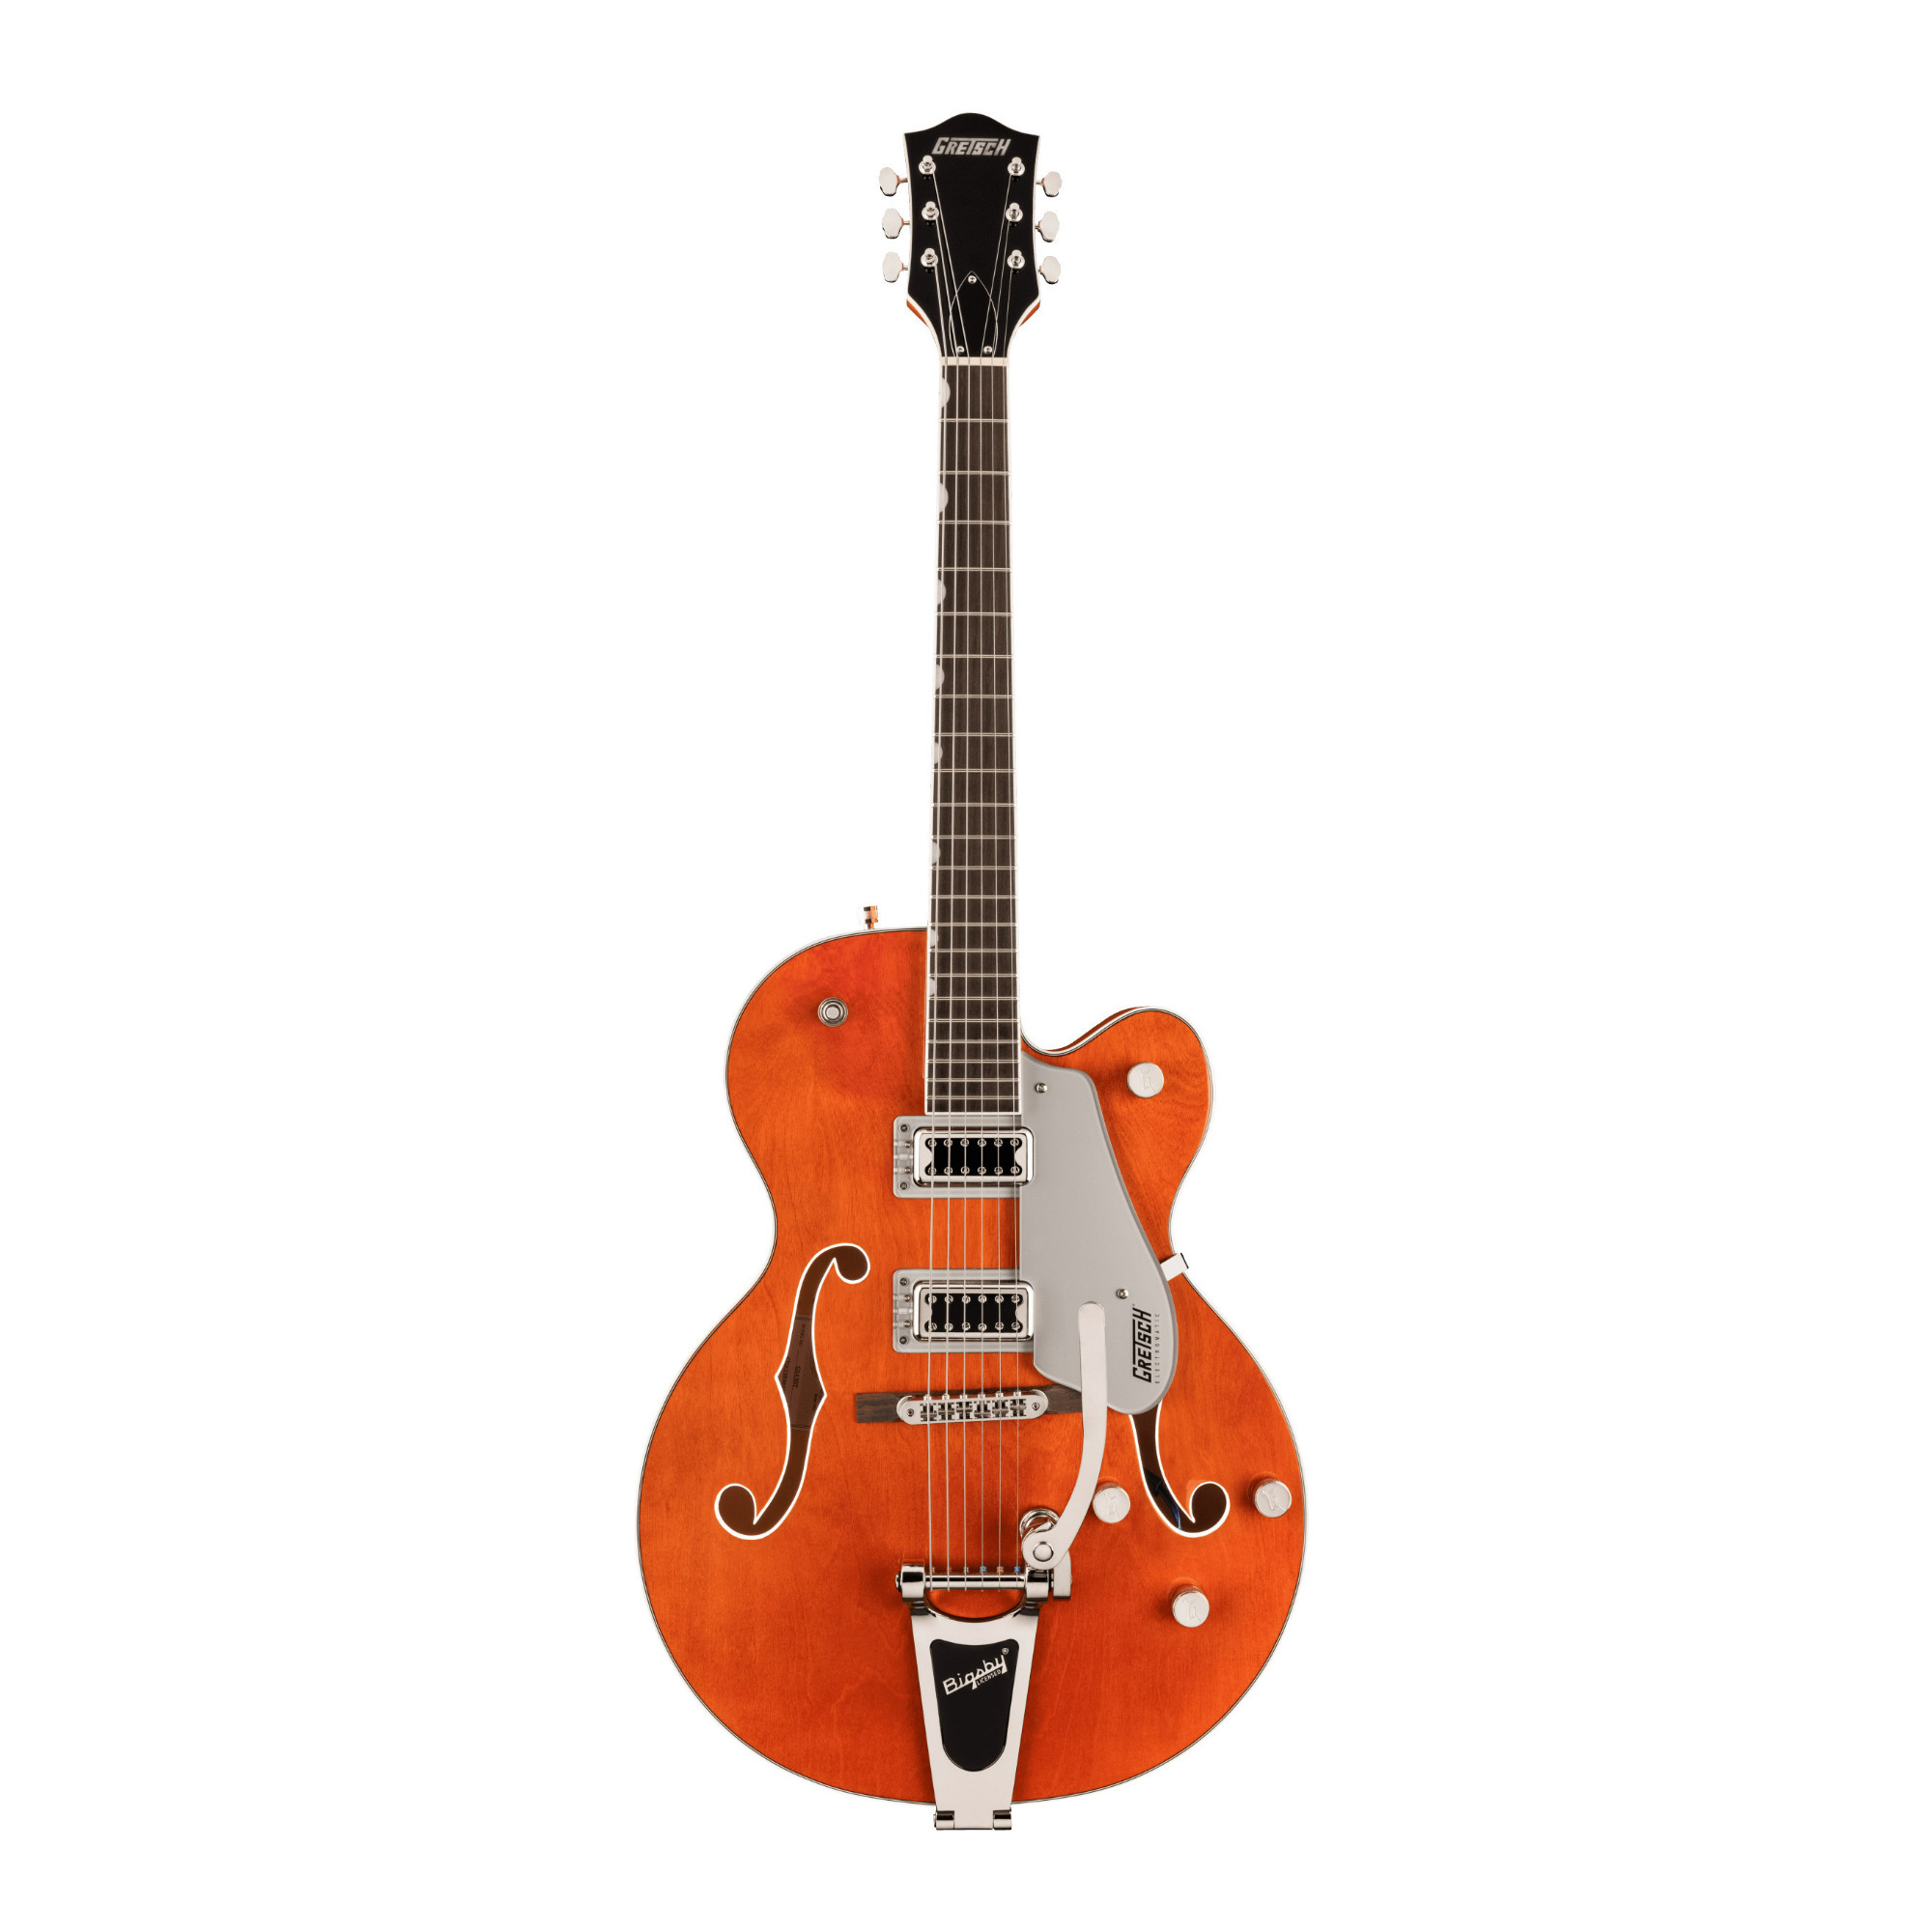 Gretsch Guitars Gretsch G5420T Electromatic Classic Hollow Body 6-String Electric Guitar (Right-Hand, Orange Stain) -  2506115512